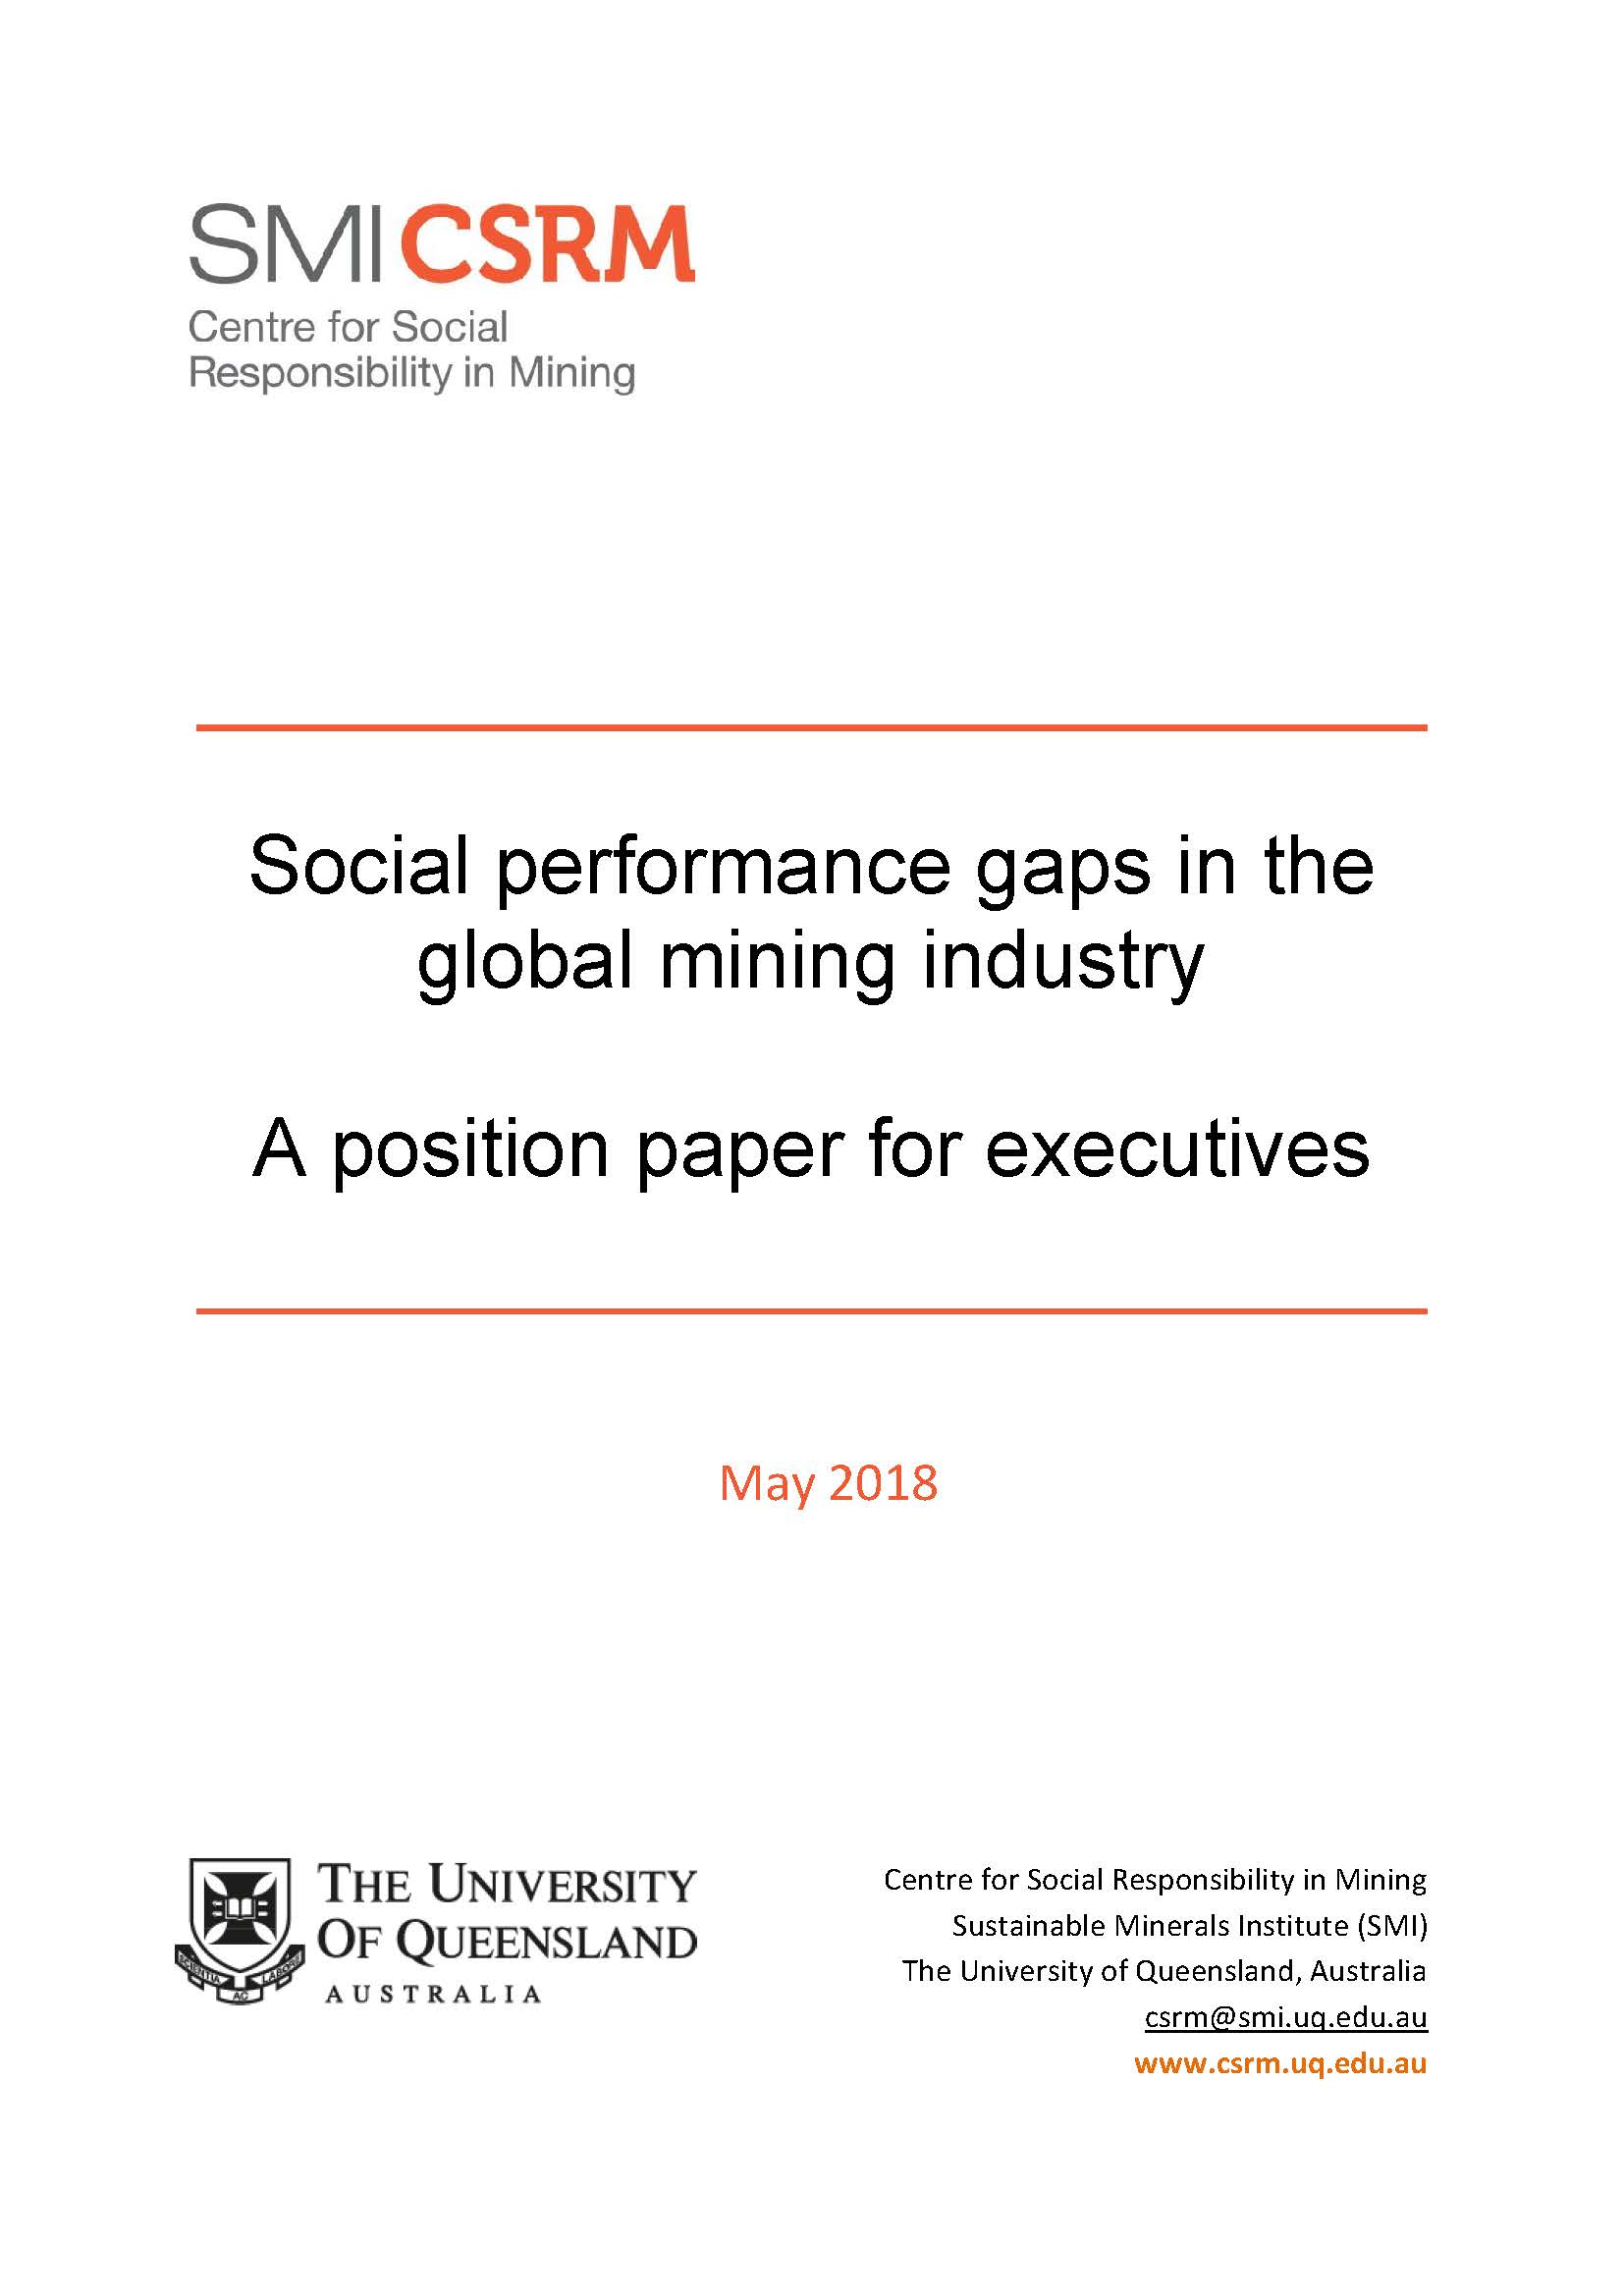 Social performance gaps in the global mining industry: a position paper for executives